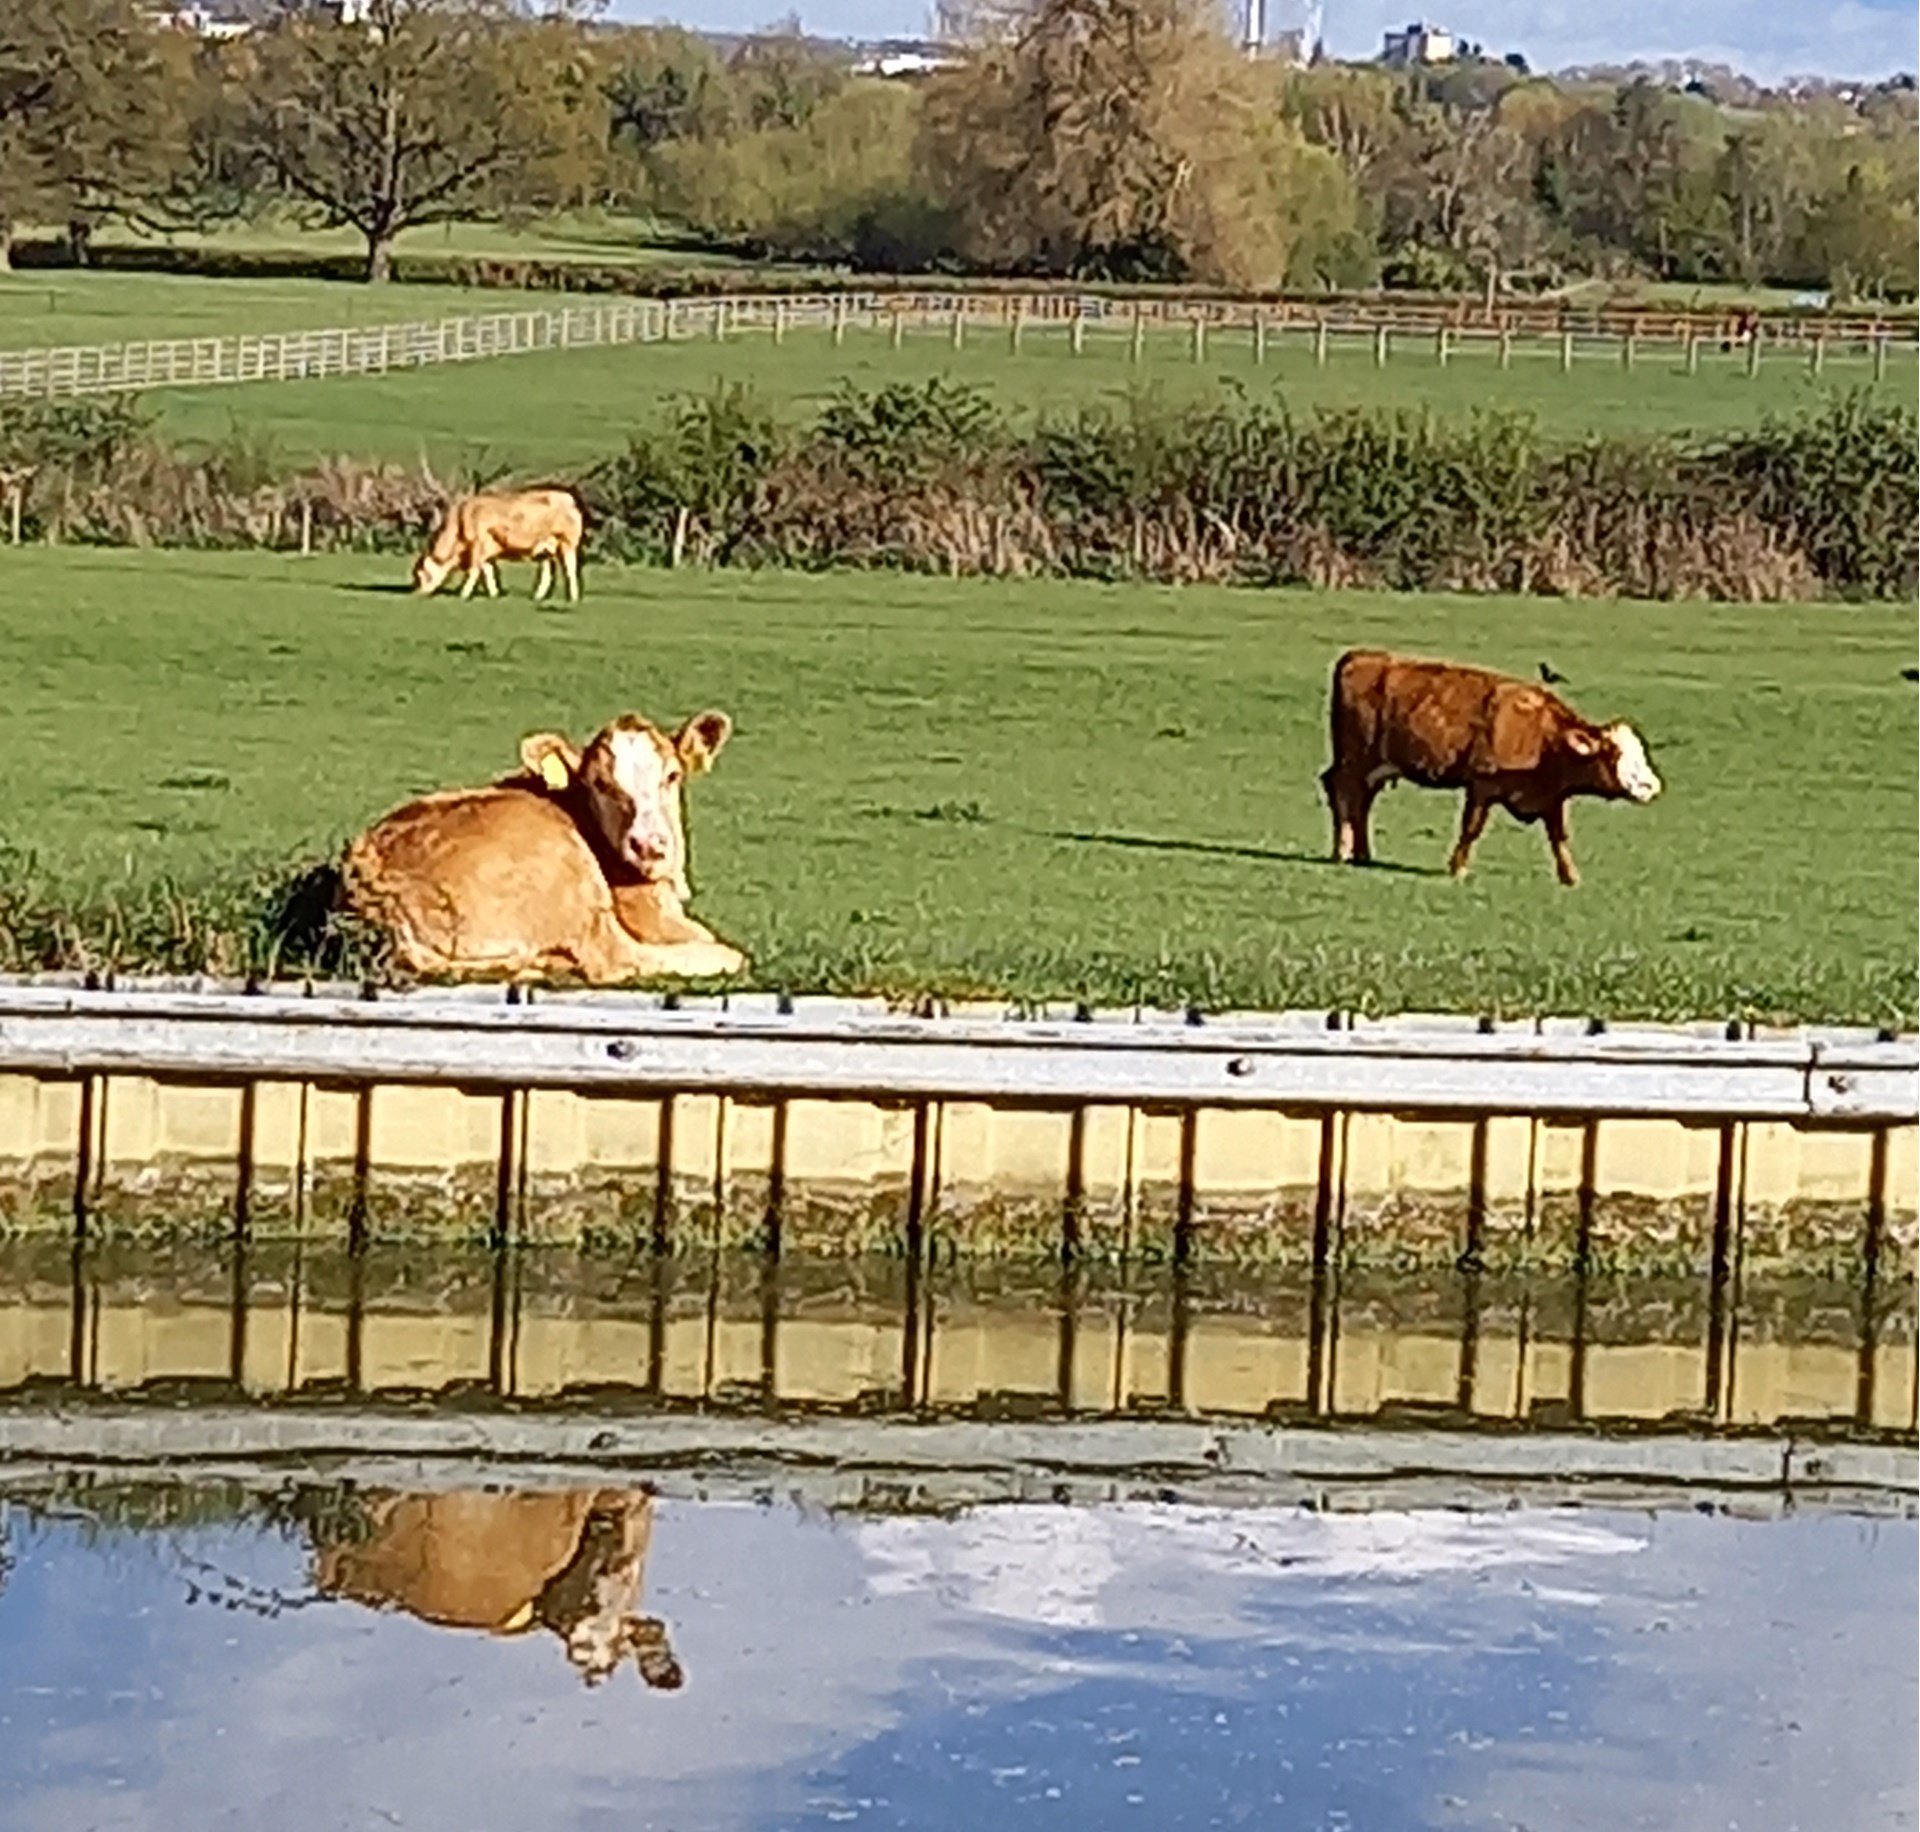 A calf resting on the canal bank